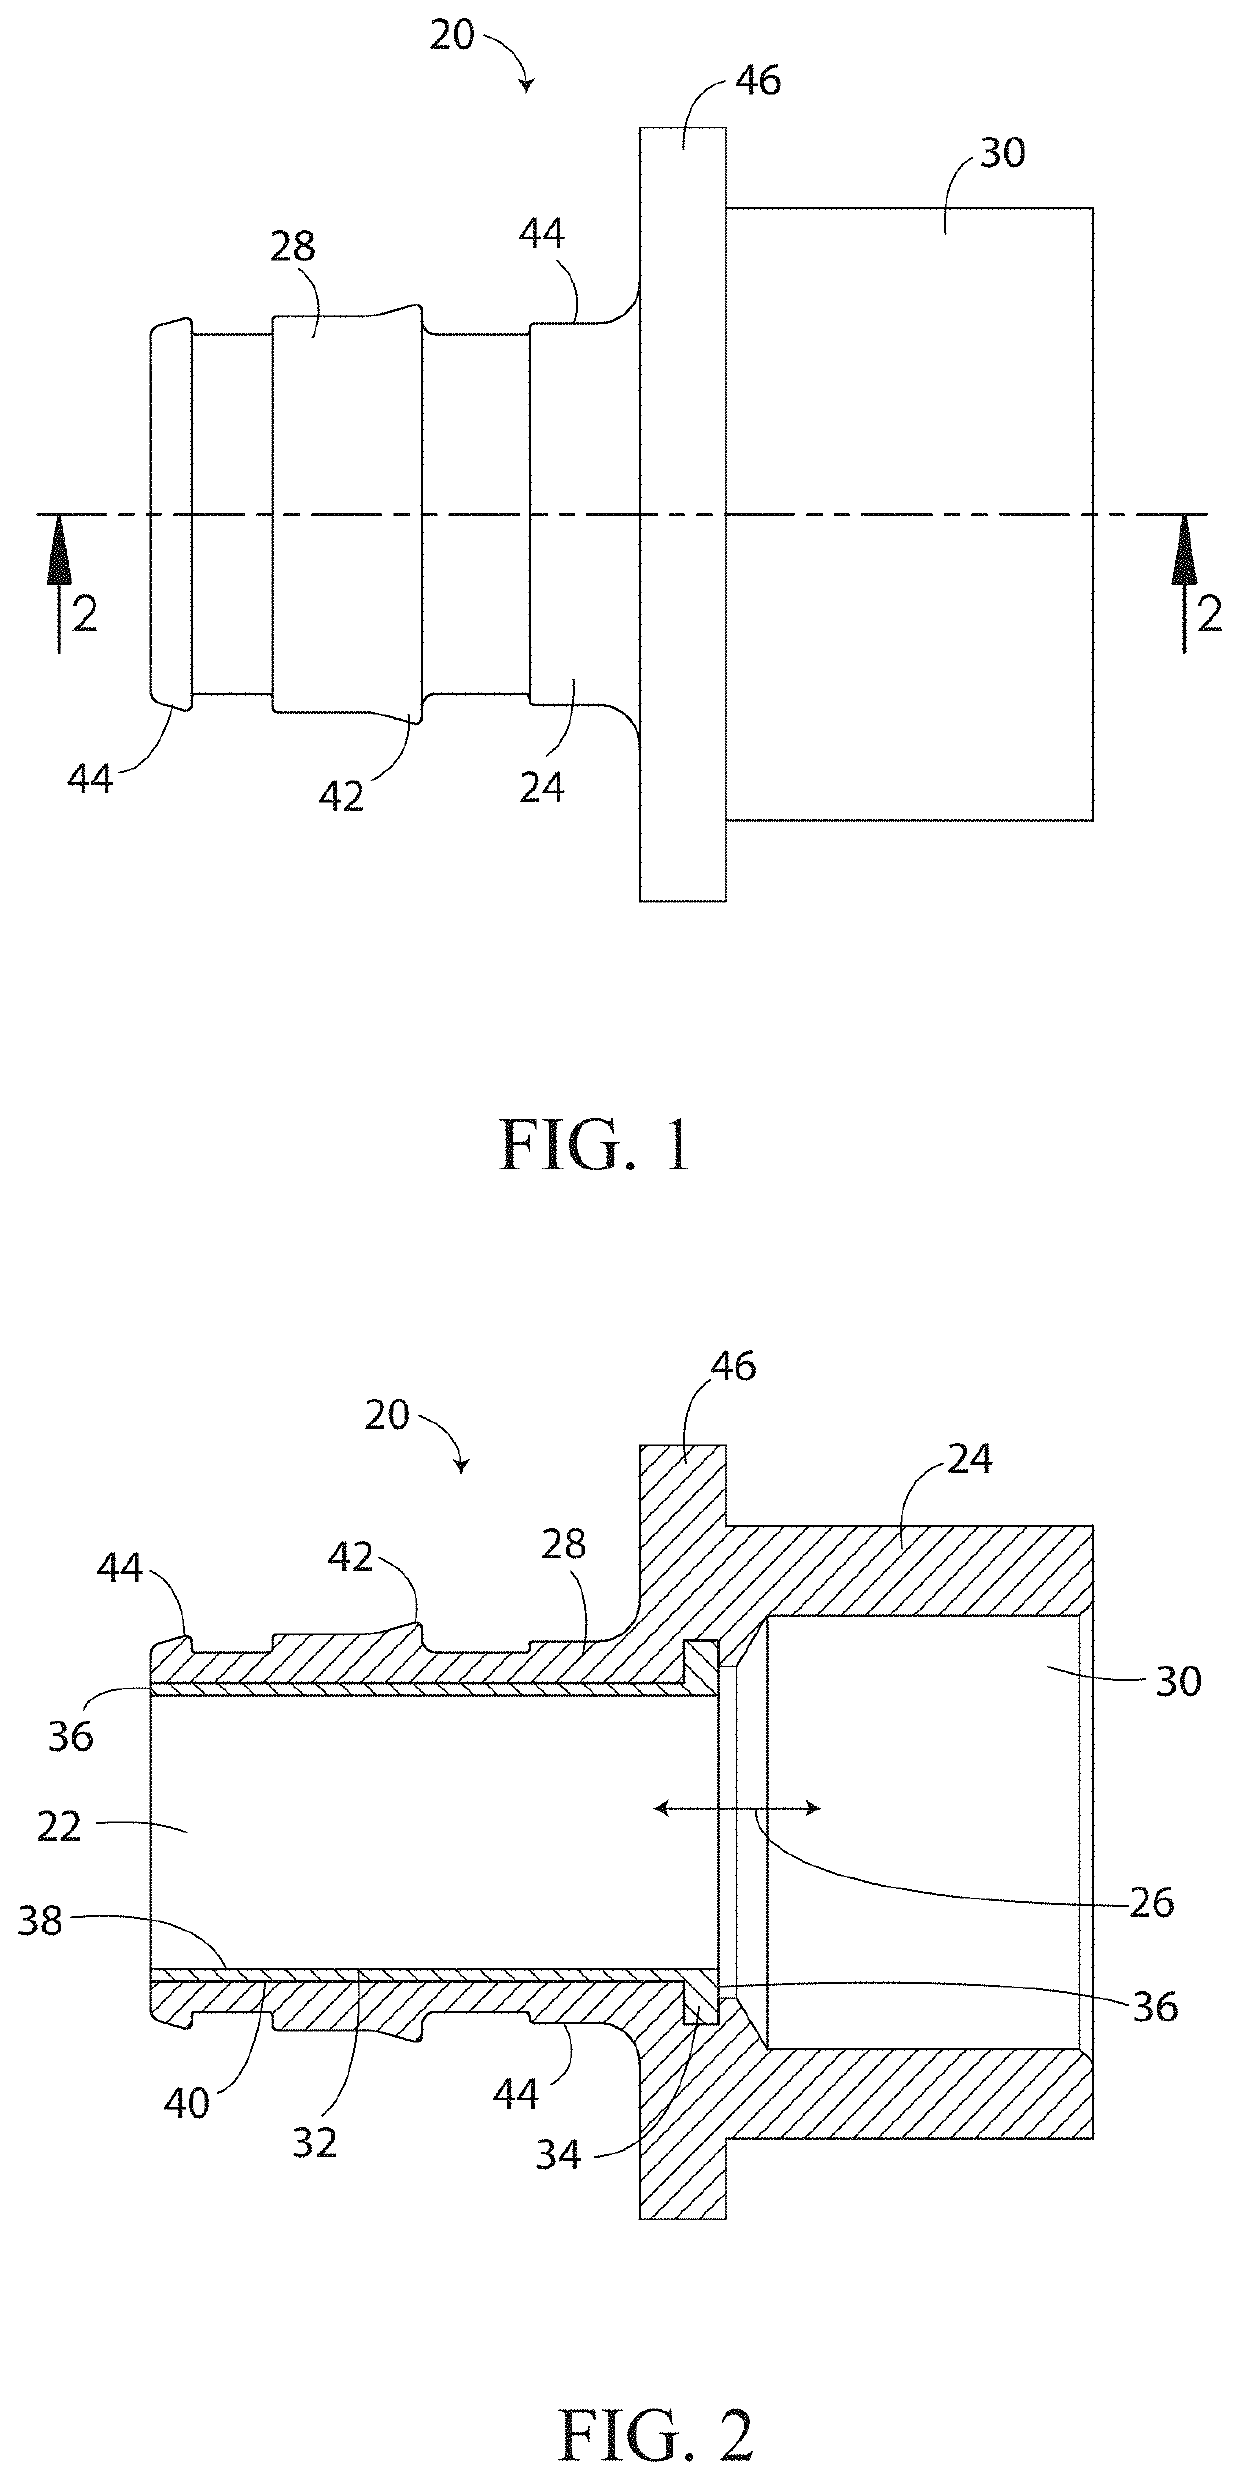 Fitting and method of manufacturing a fitting for attaching flexible tube to rigid tube